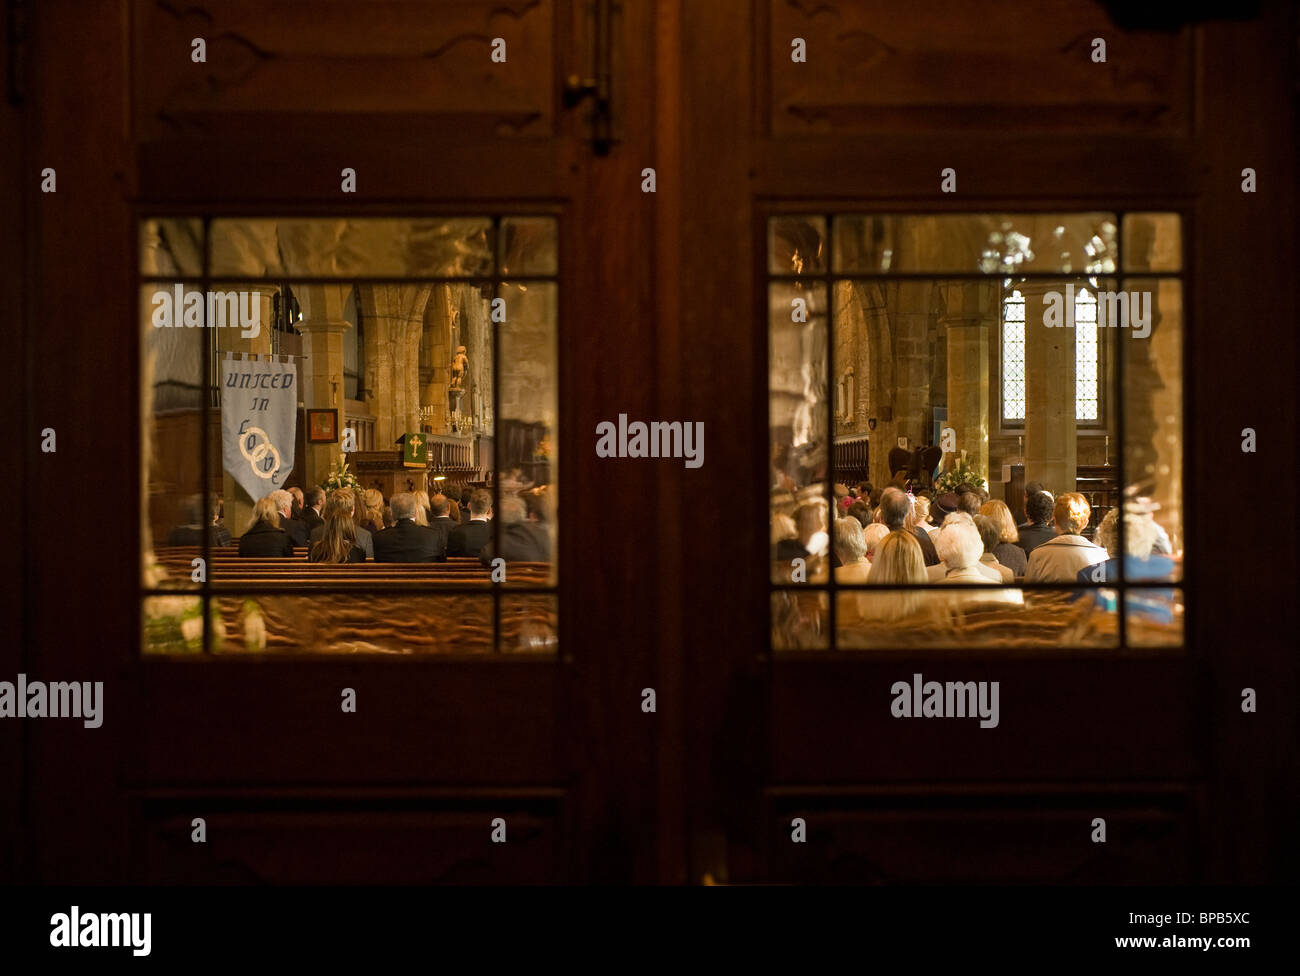 Rear view of seated congregation in UK church, seen through the windows of closed wooden doors. Stock Photo